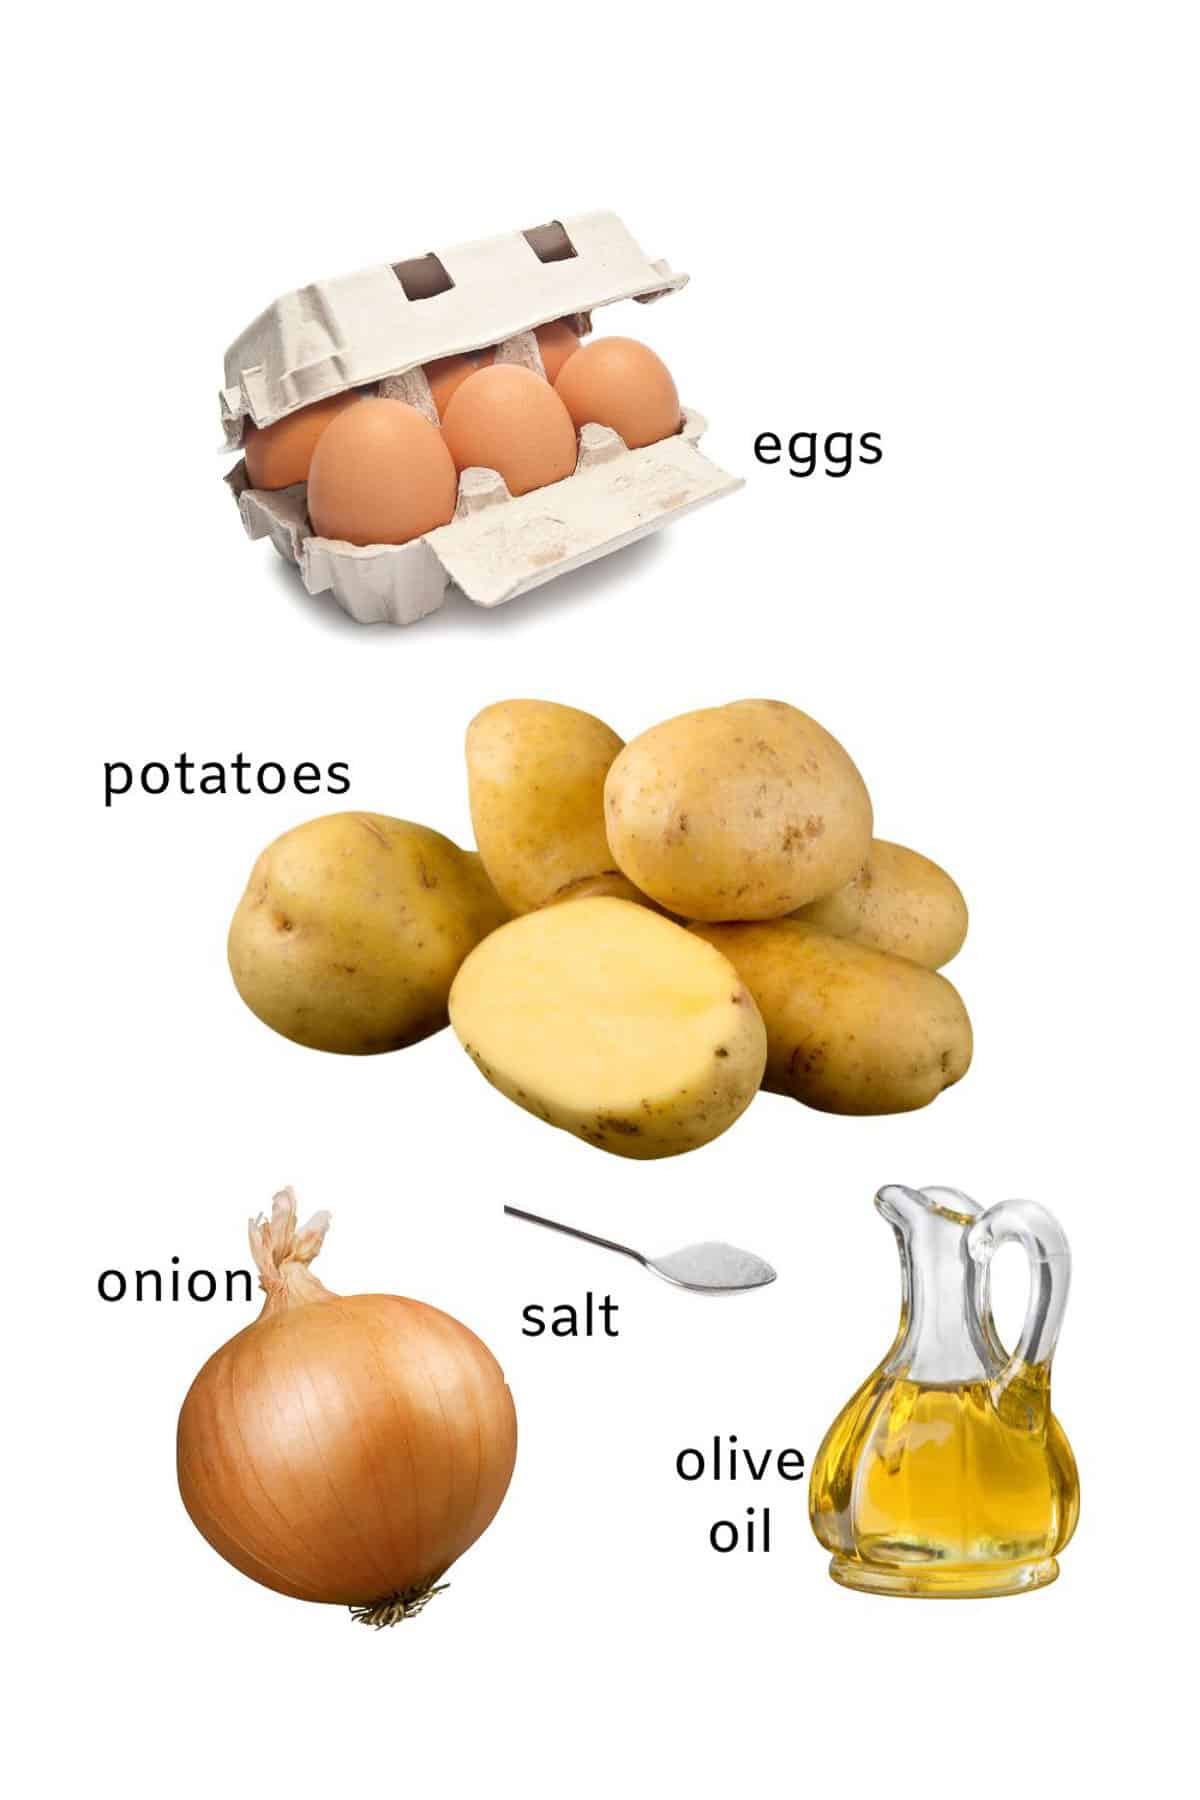 Ingredients for Tortilla Española: potatoes, eggs, onion, olive oil and salt.